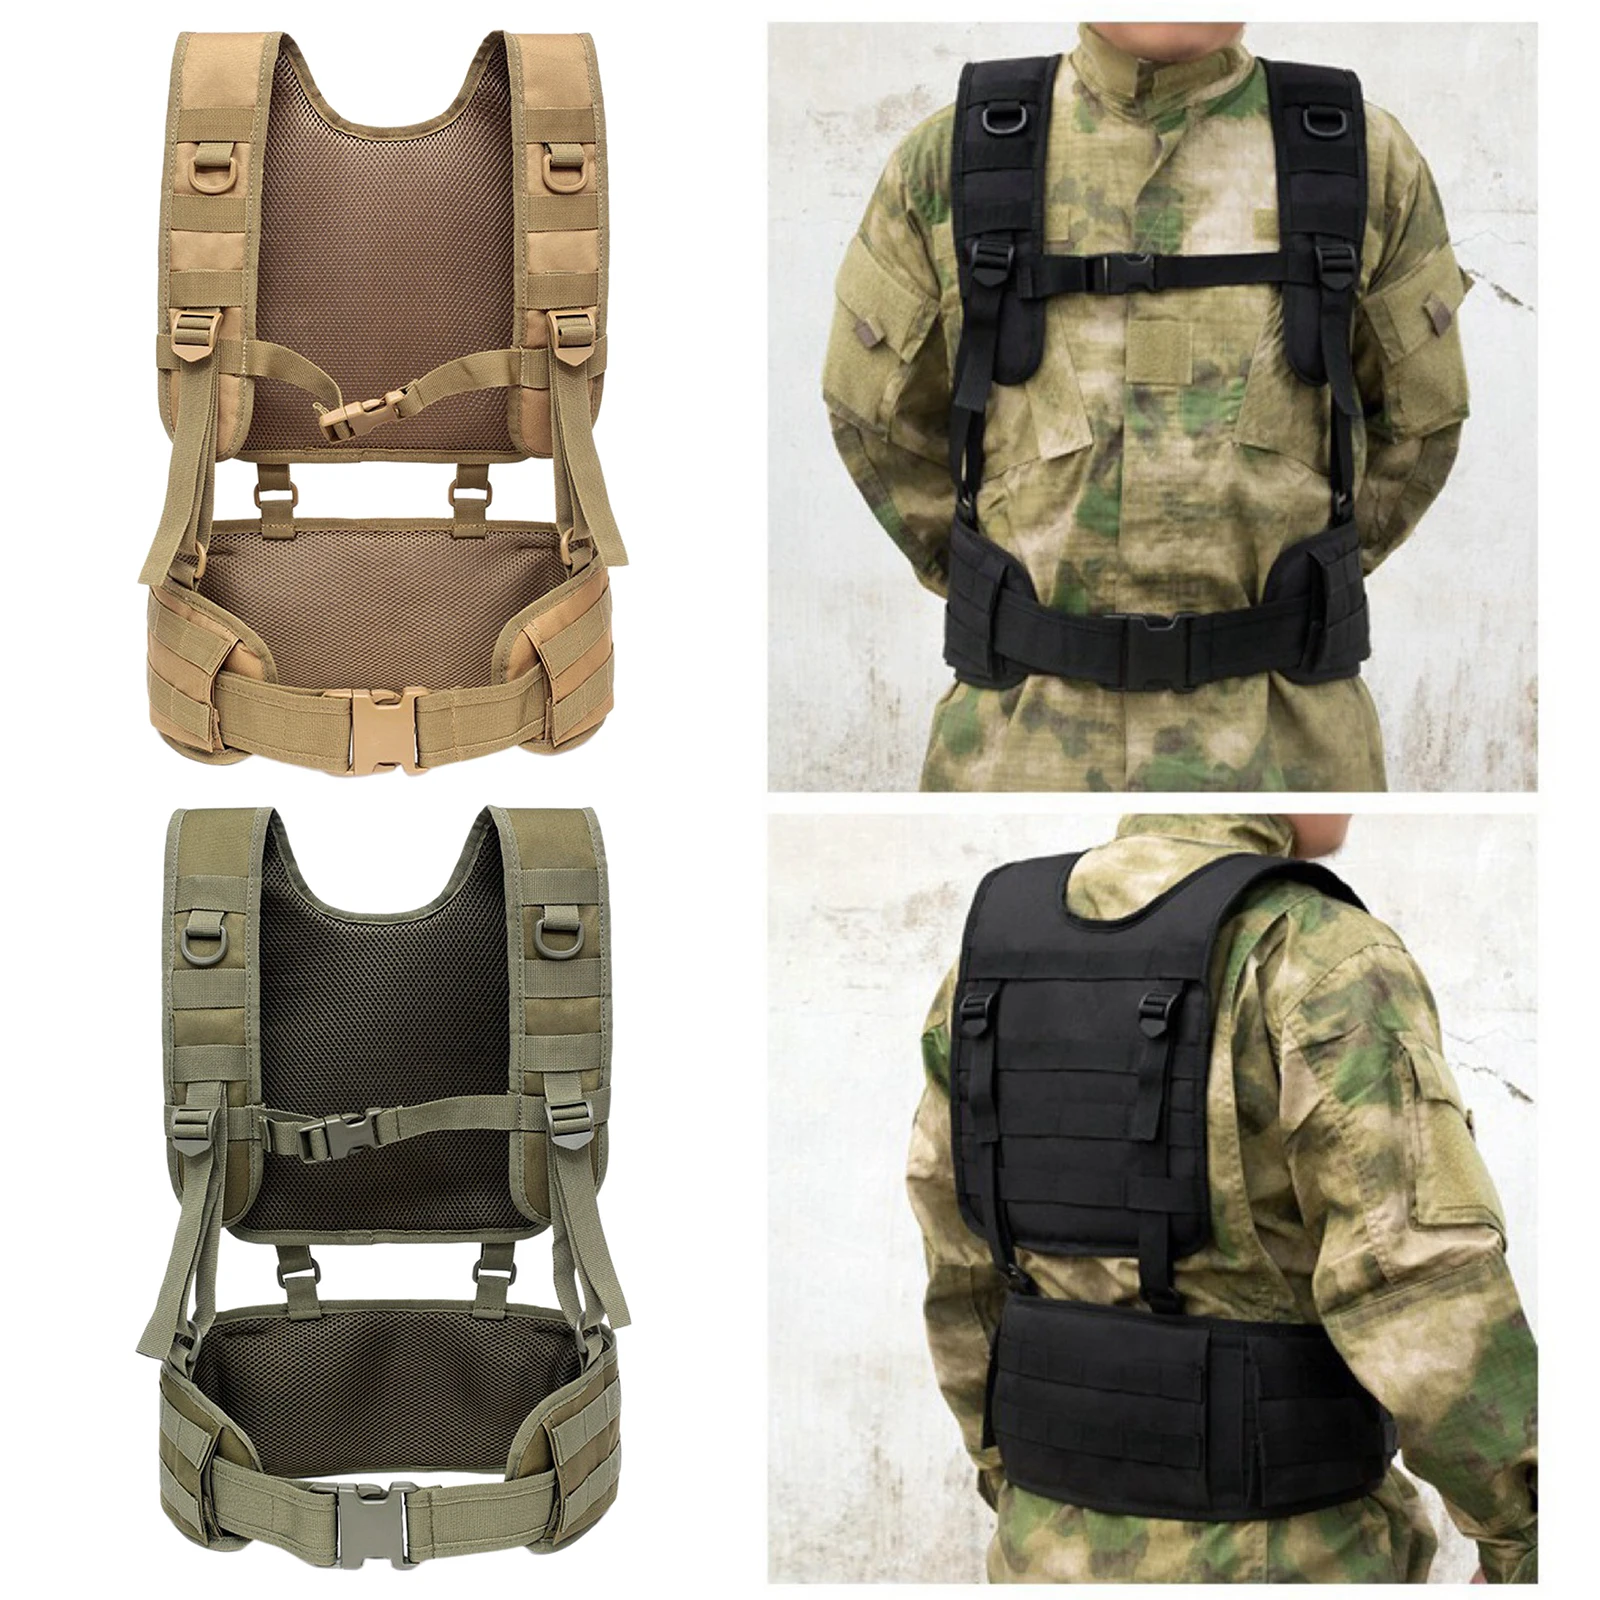  Vest Outdoor Ultralight Breathable Modular Vest for Special Mission Training Fields And Camping, Hunting, Fishing, Hiking